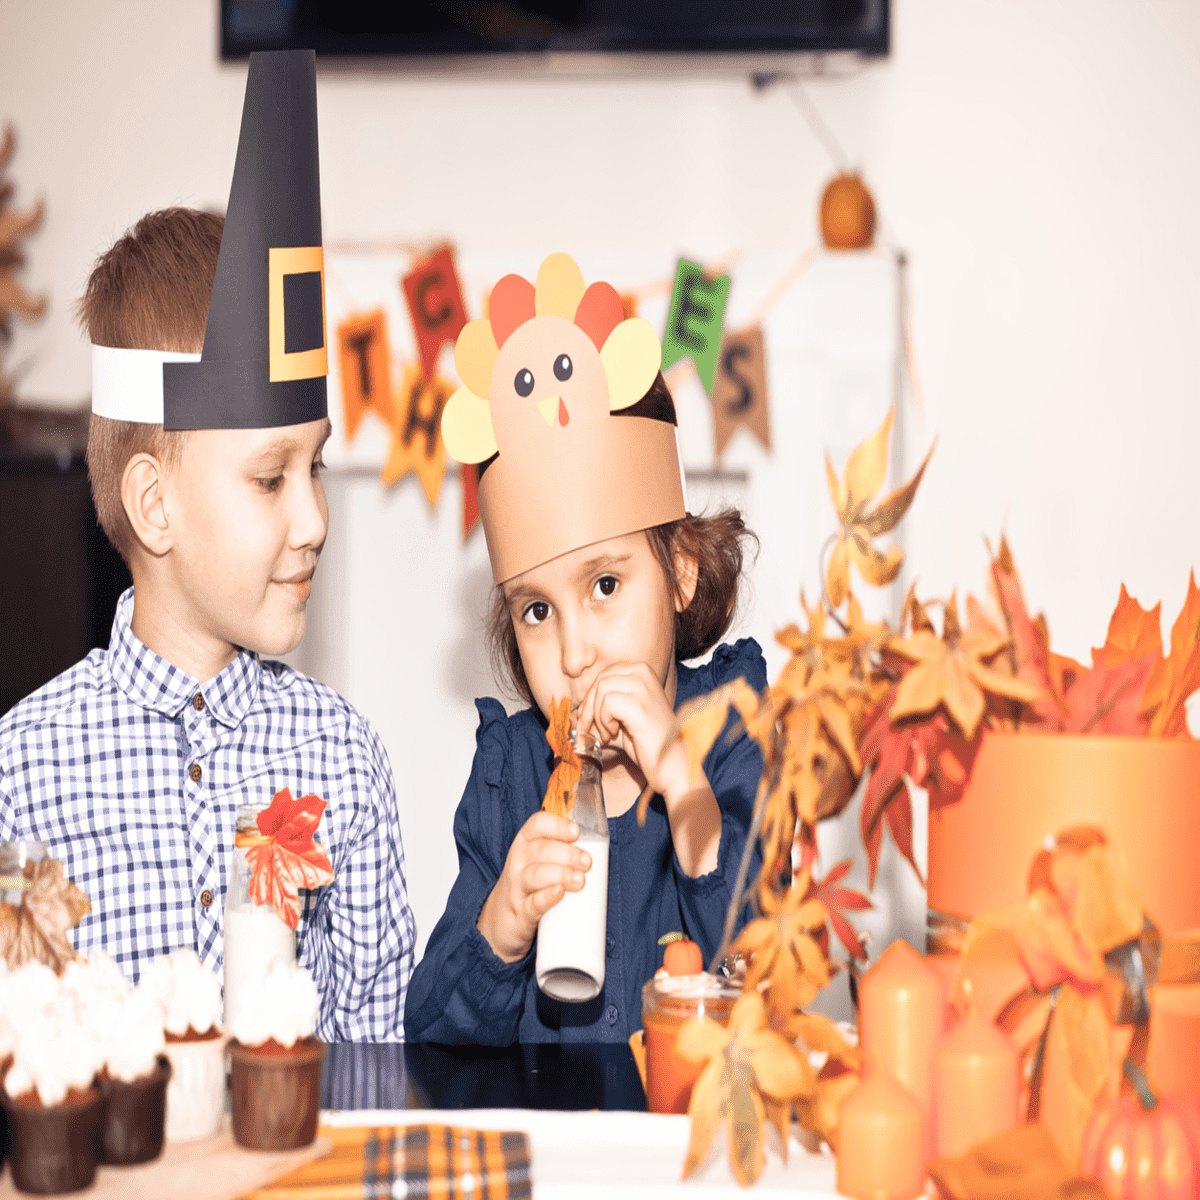 9 Awesome Thanksgiving Activities For You and Your Family